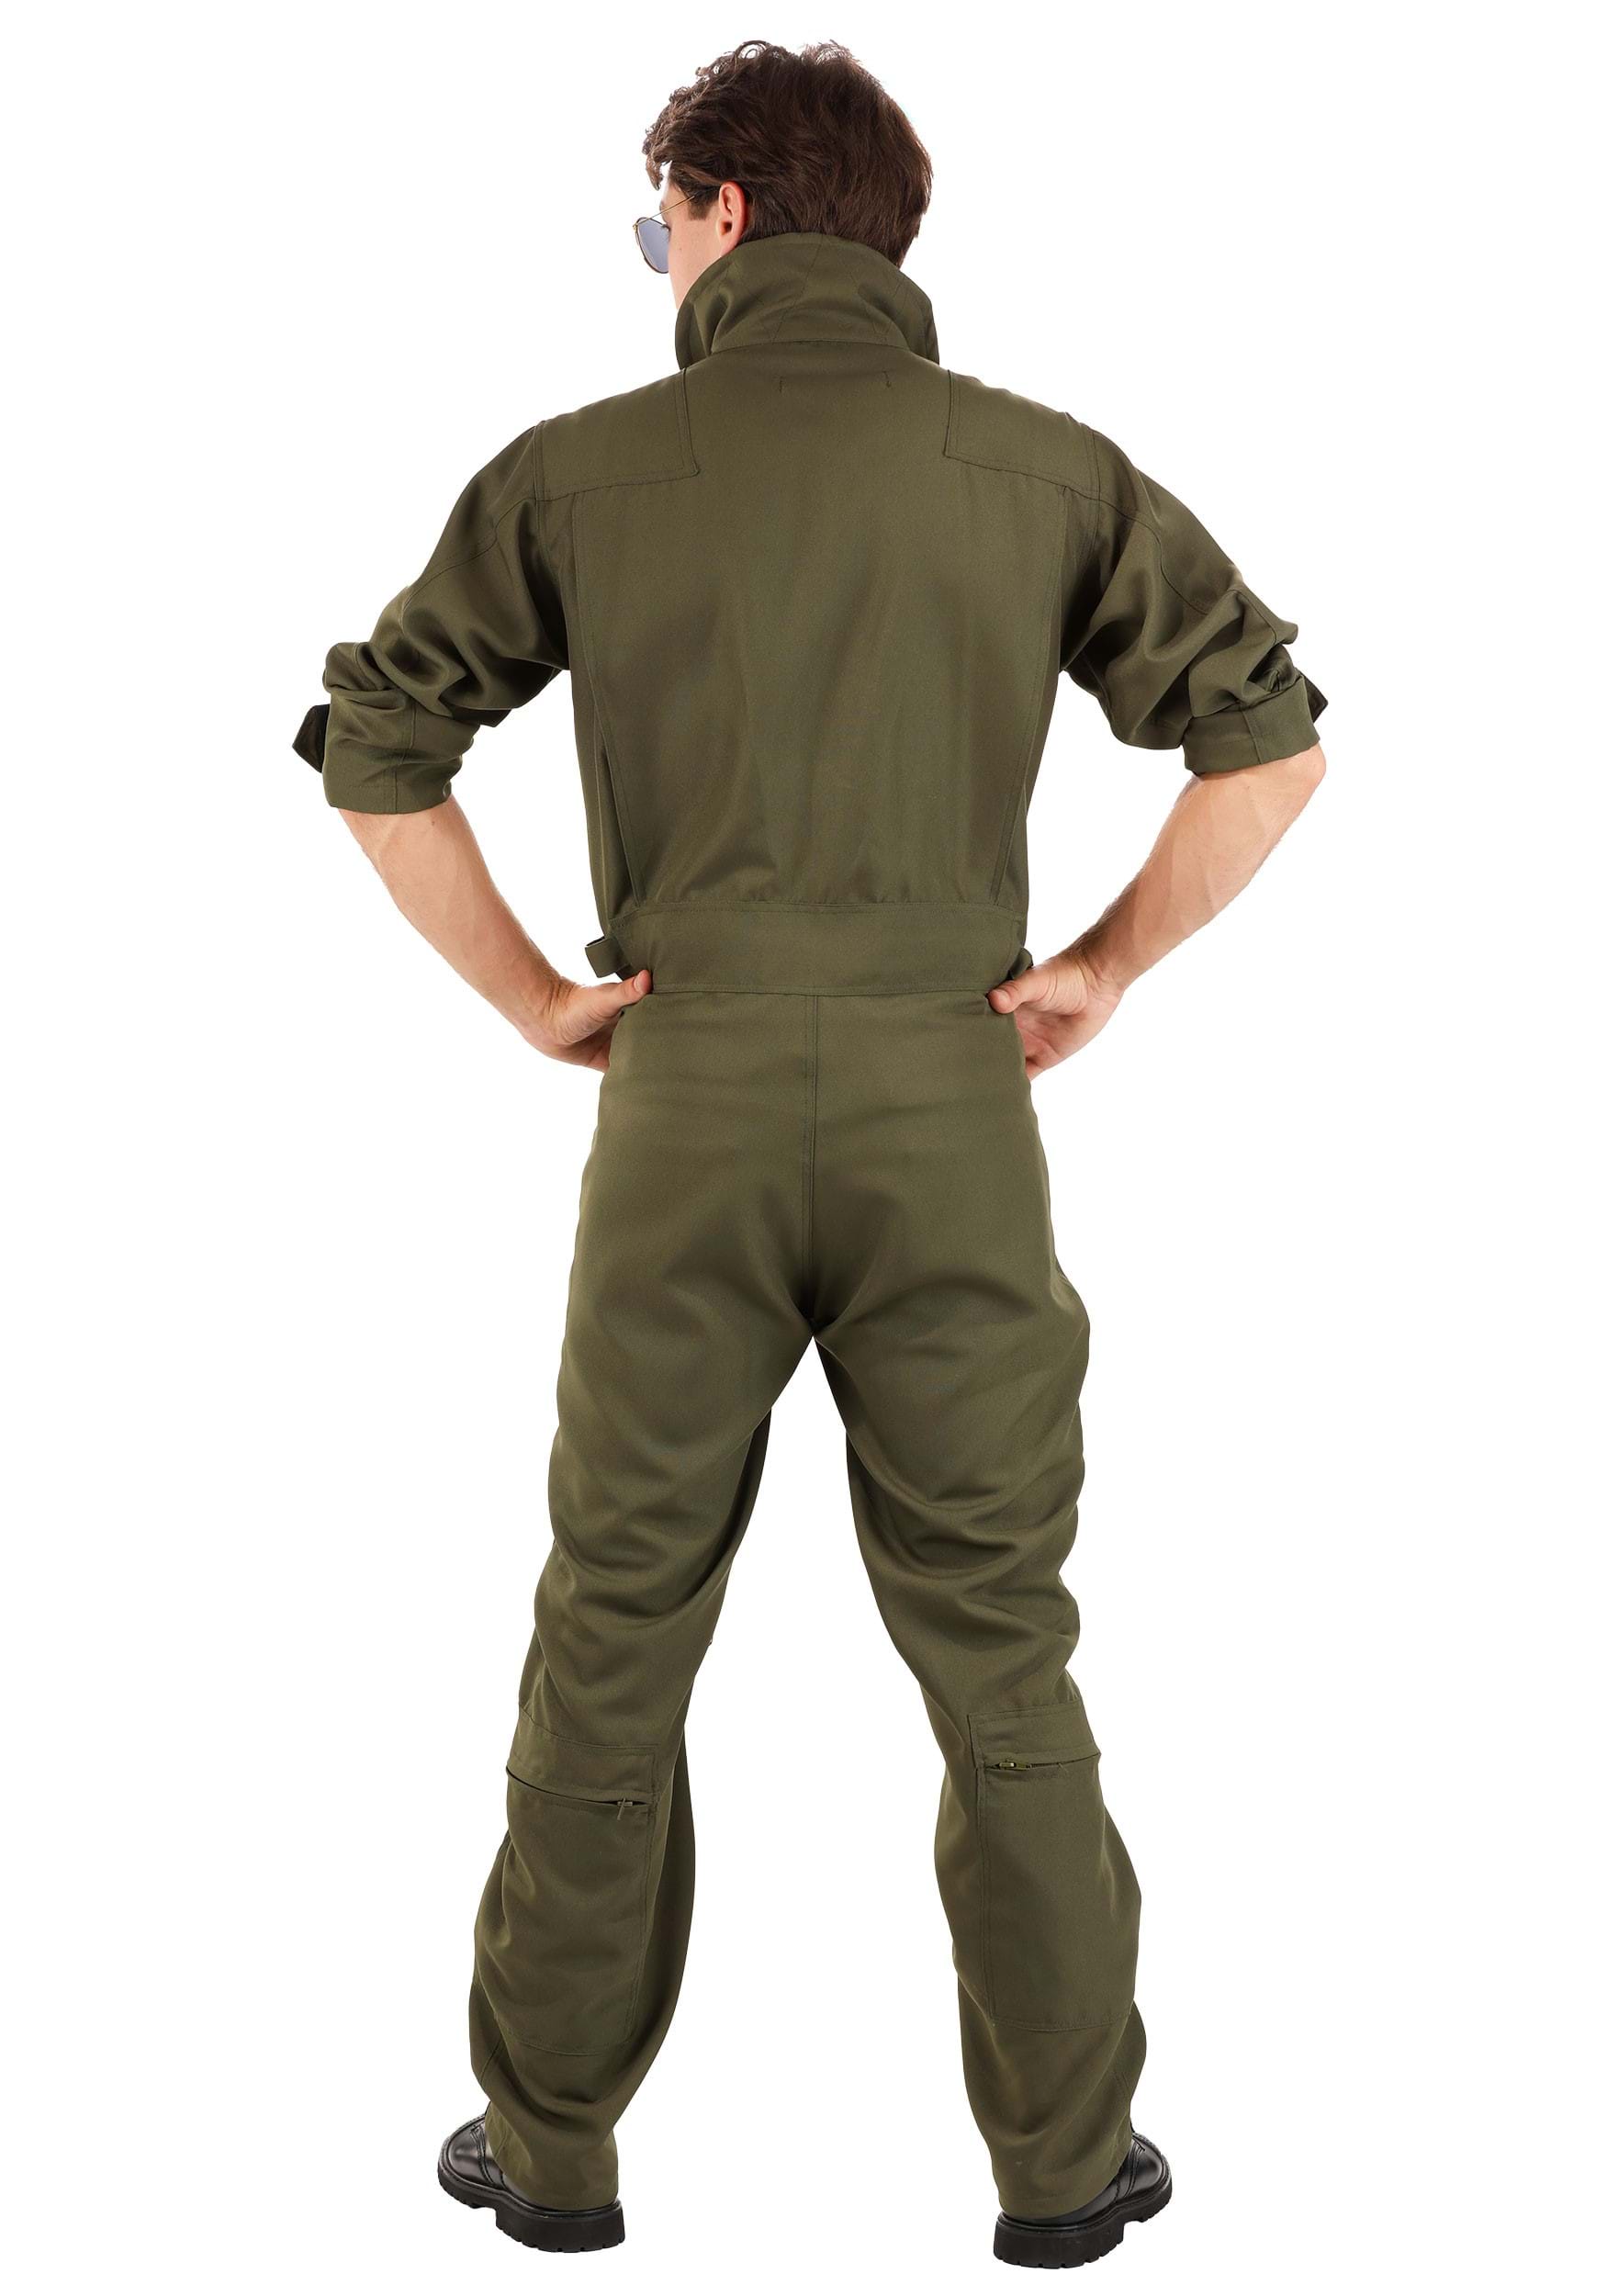 Kids Air Force Style Flight Suit - Olive Drab with Patches -  MyPilotStore.com